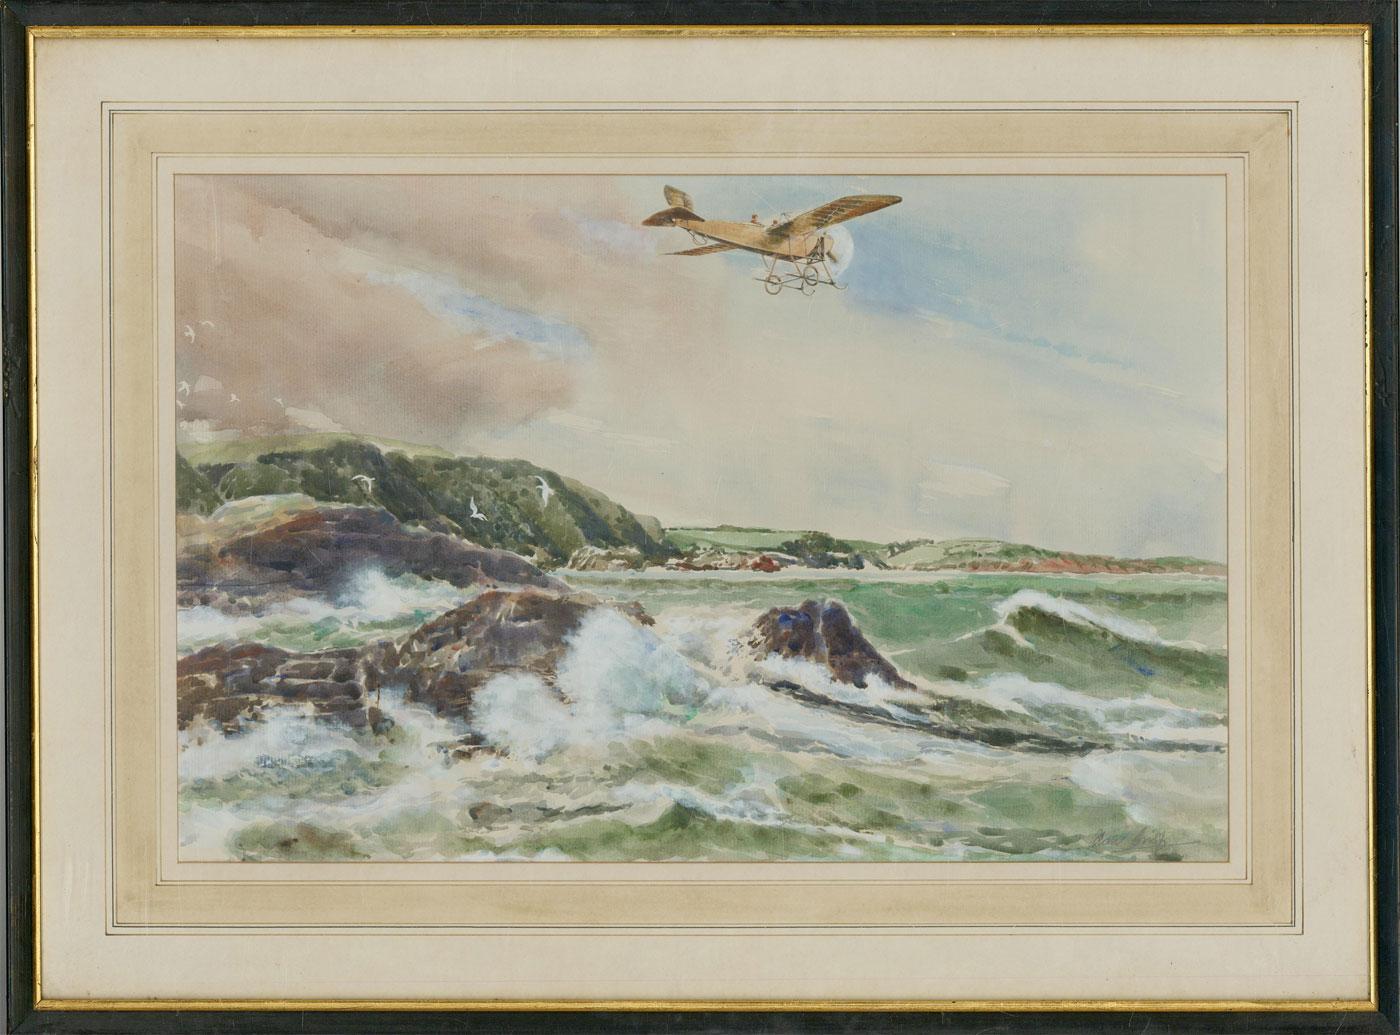 Waves crash on rocks as a plane flies defiantly over the coastline.Well presented in a molded black frame with a gilded inner window, glazing, and a washline mount.Signed.

 
On laid.